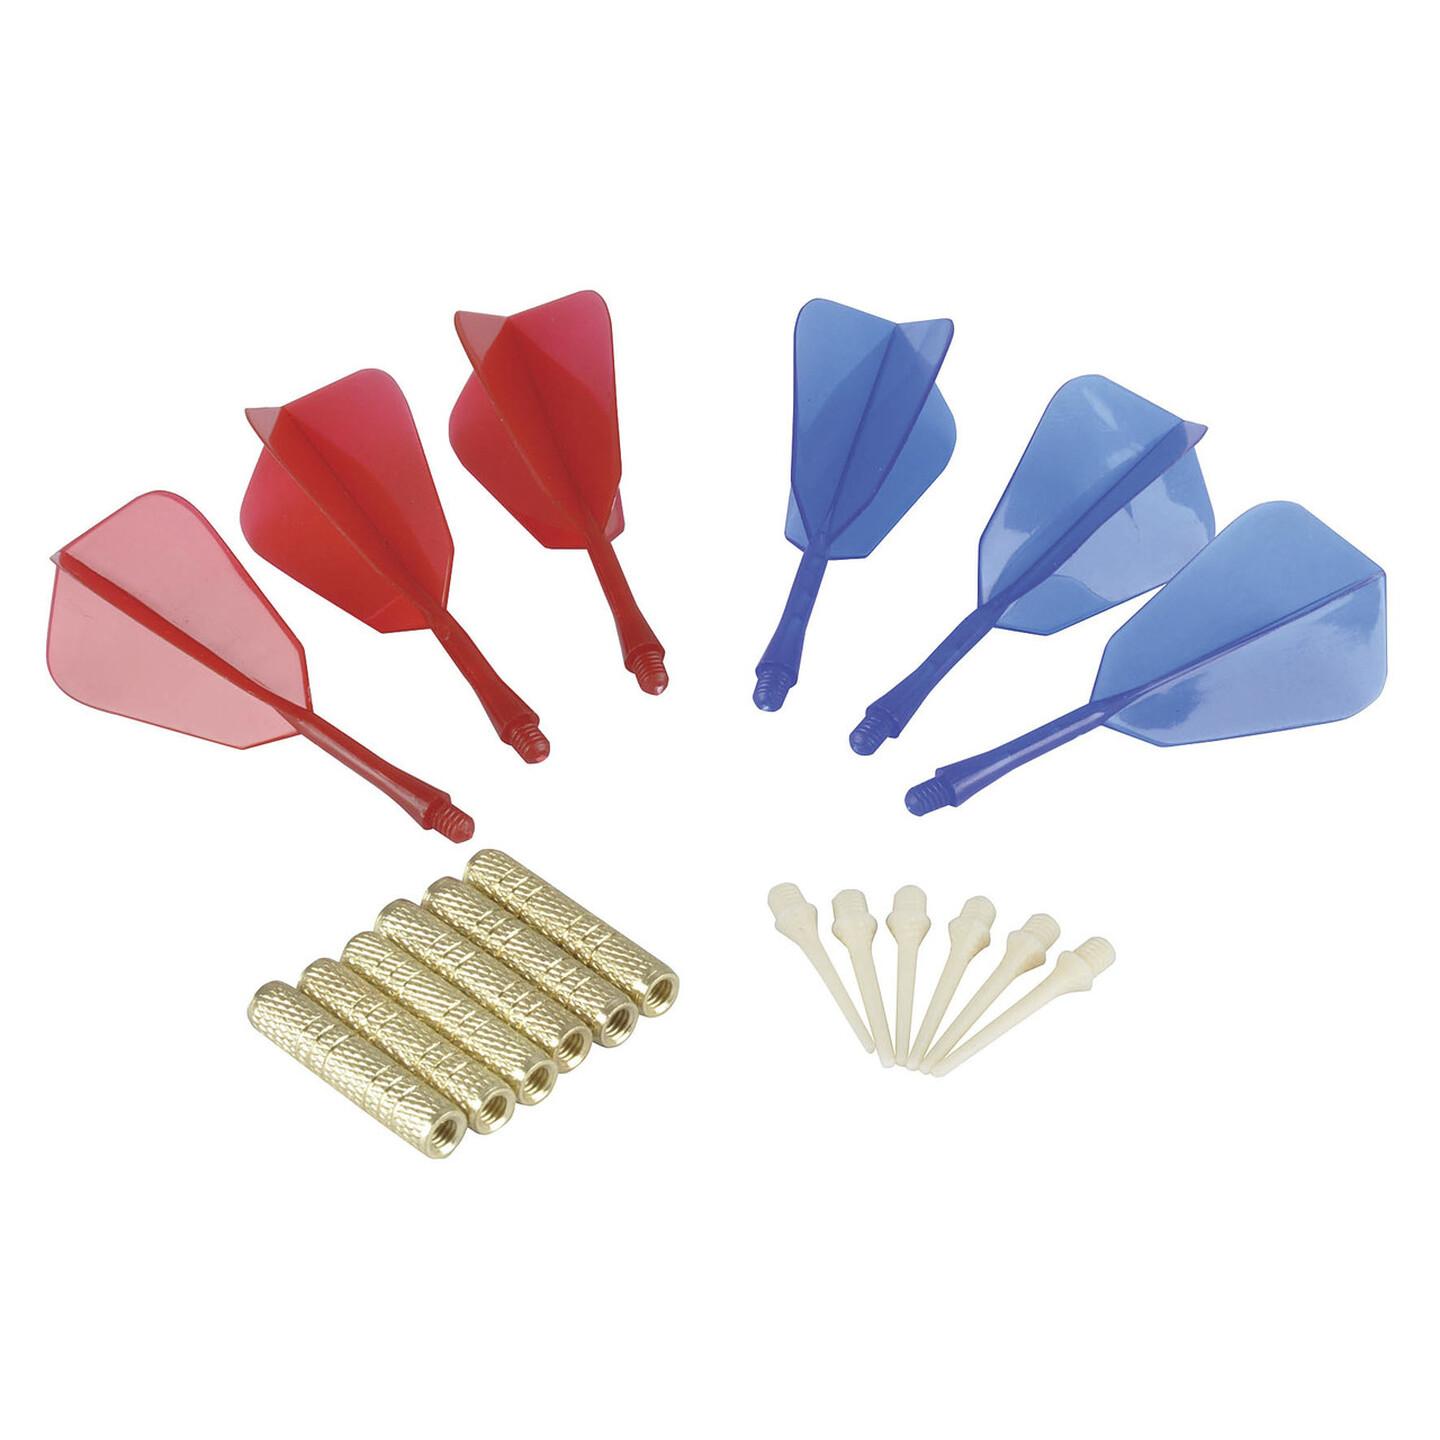 6 Pack Spare Darts for GH1158